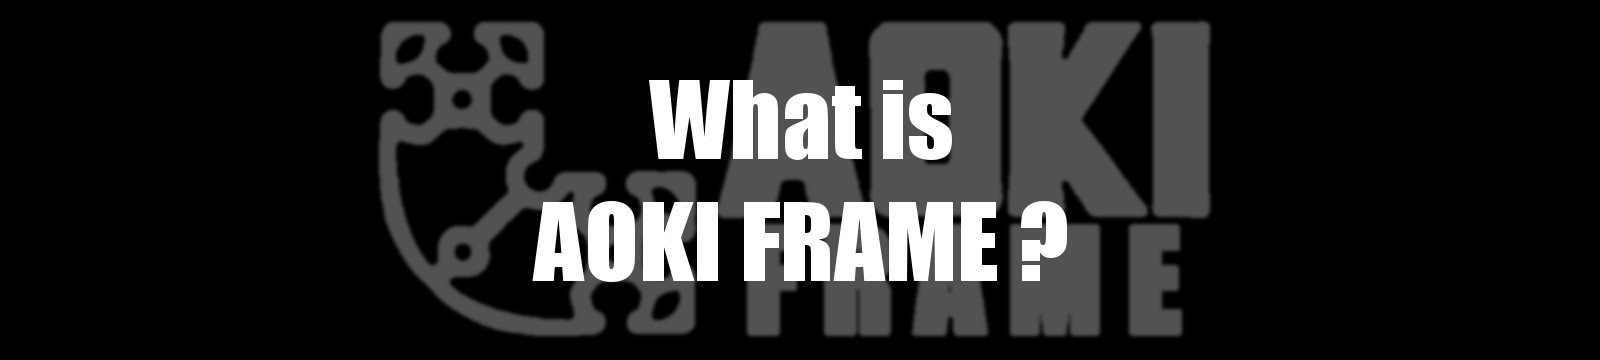 What is AOKI FRAME ?